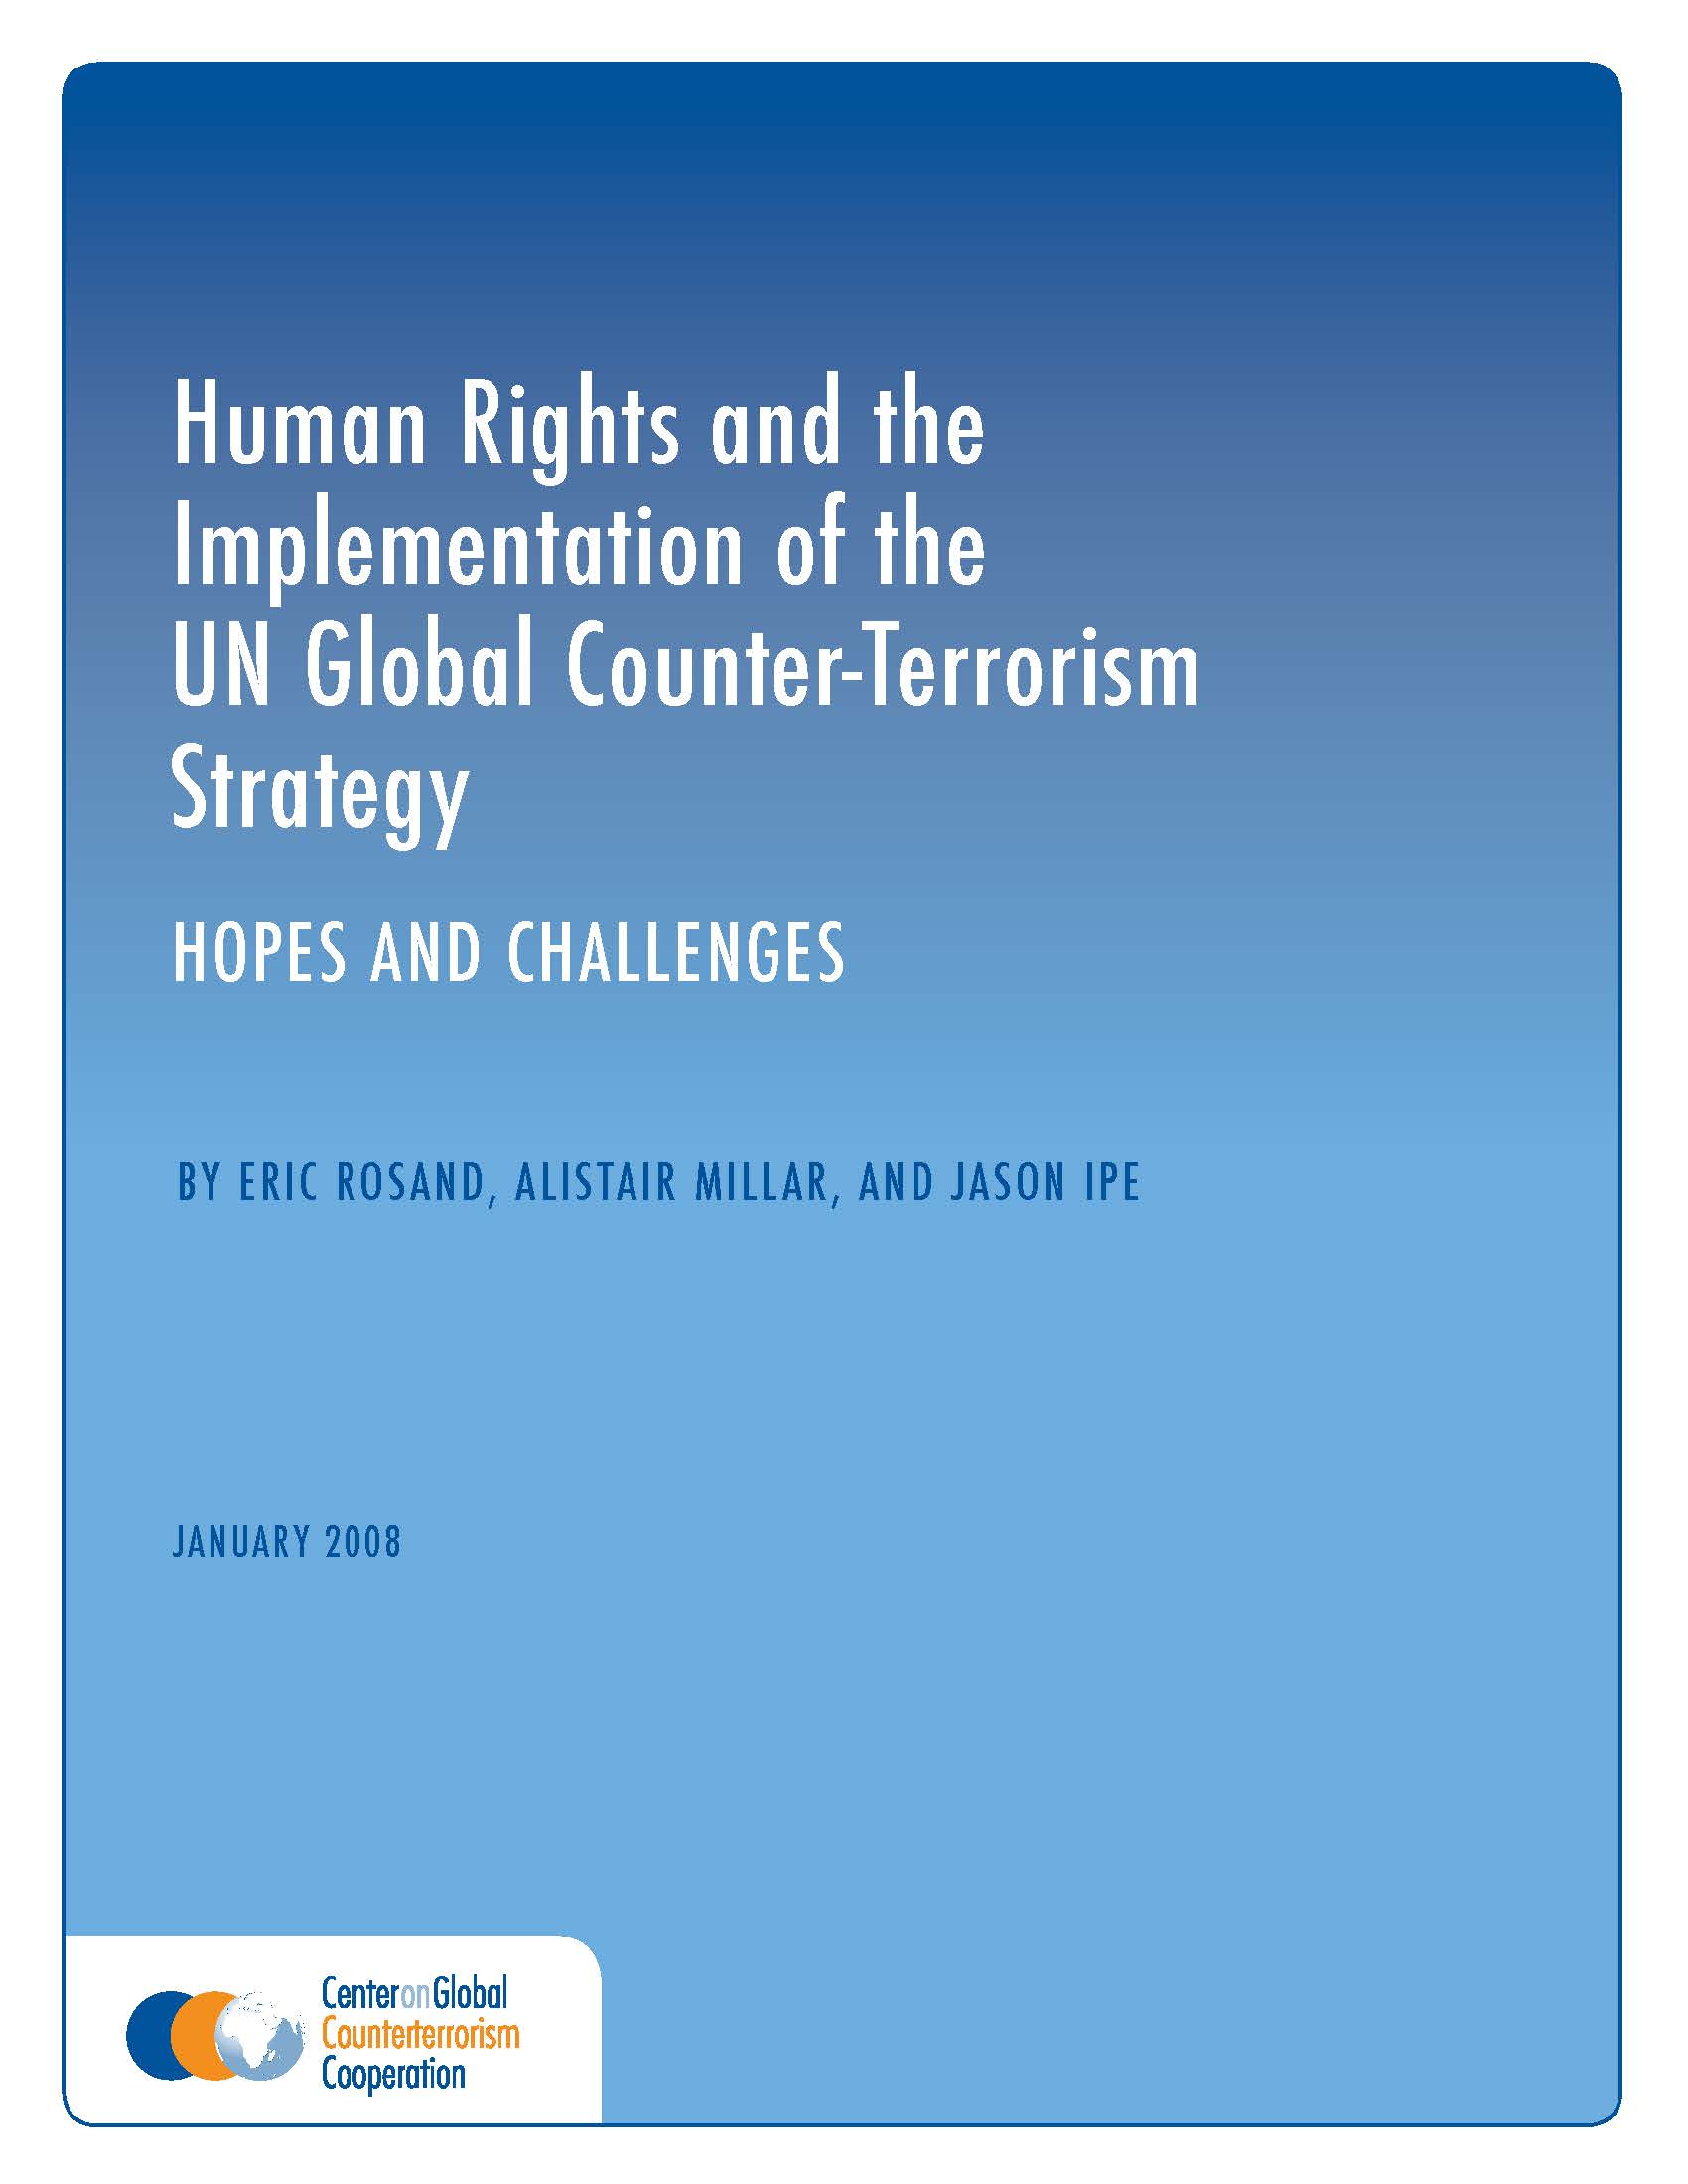 Human Rights and the Implementation of the UN Global Counter-Terrorism Strategy: Hopes and Challenges